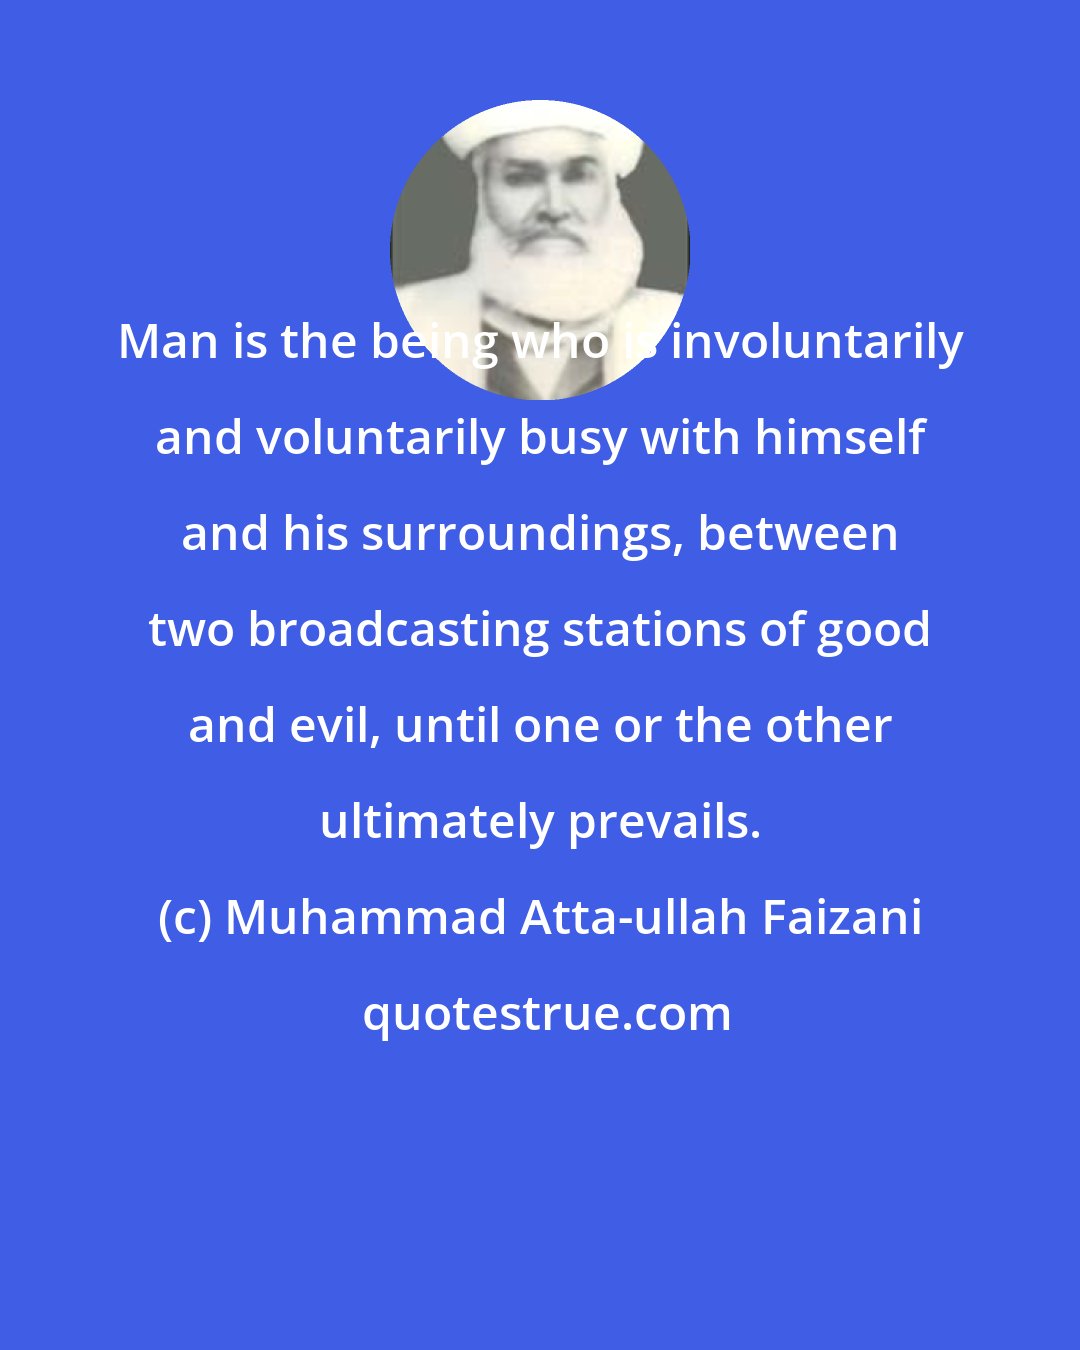 Muhammad Atta-ullah Faizani: Man is the being who is involuntarily and voluntarily busy with himself and his surroundings, between two broadcasting stations of good and evil, until one or the other ultimately prevails.